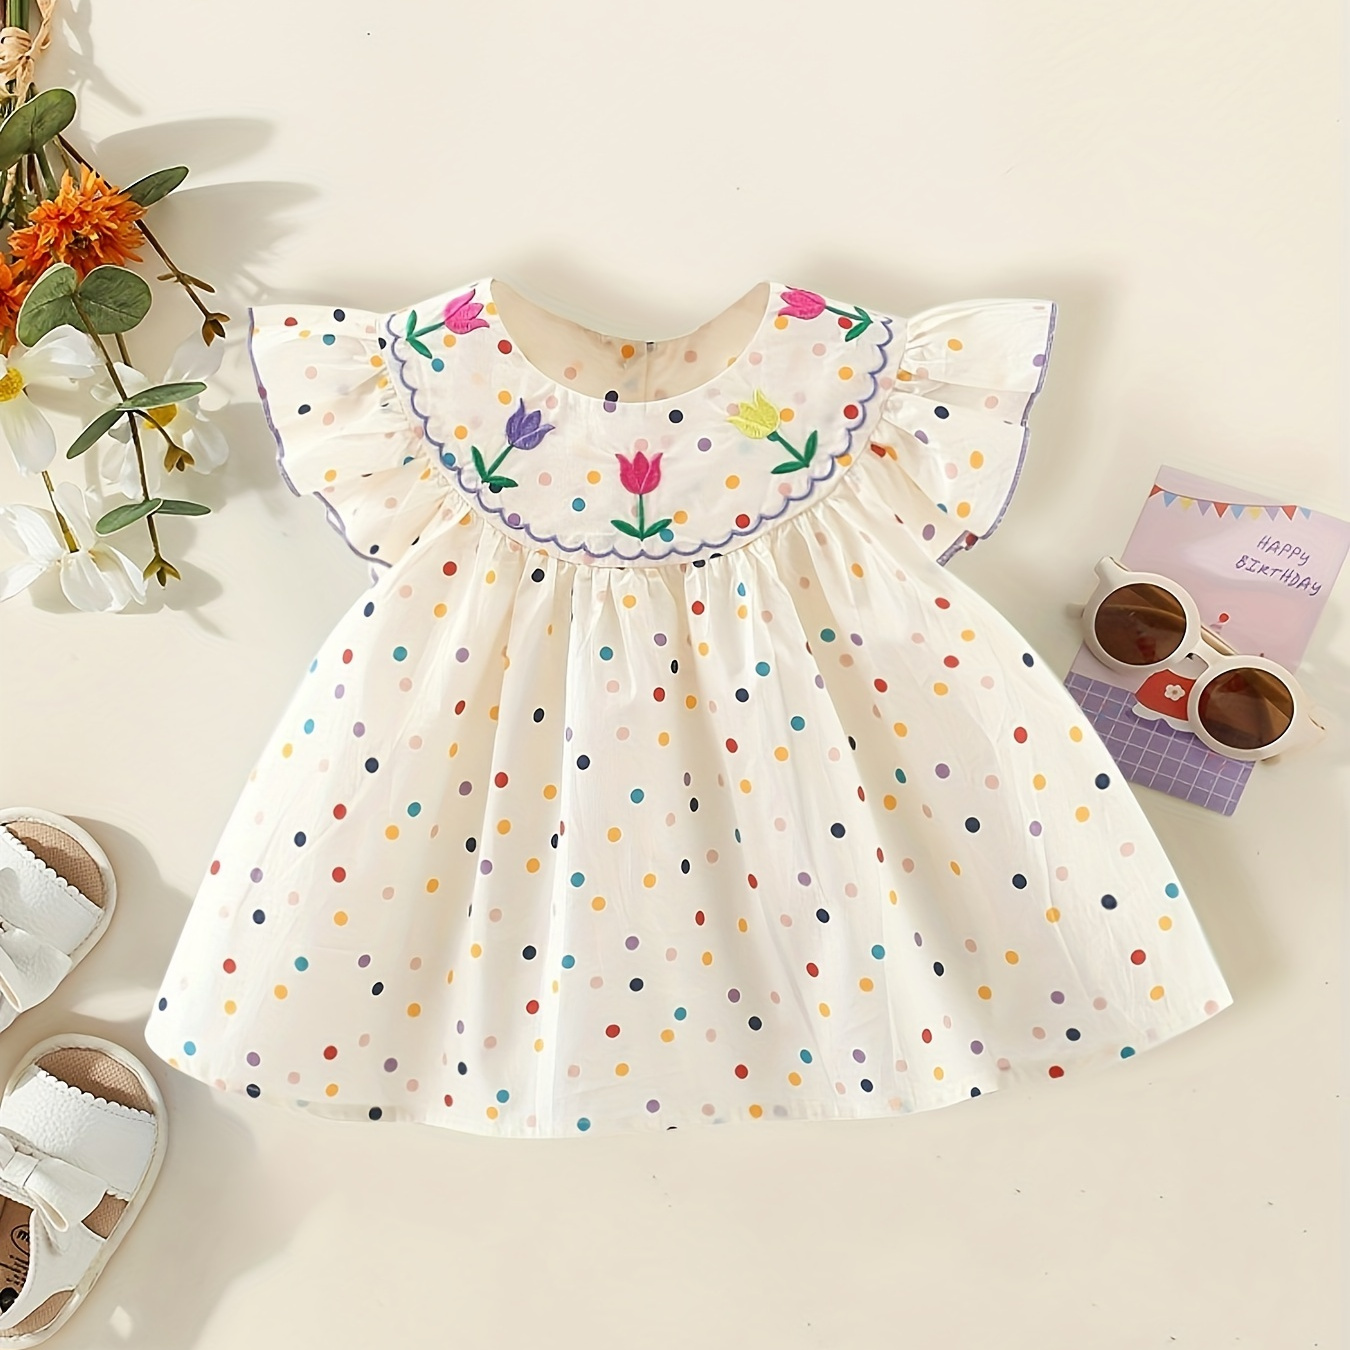 

Baby's Tulip Embroidered Casual Cotton Dress, Colorful Polka Dots Pattern Cap Sleeve Dress, Infant & Toddler Girl's Clothing For Summer, As Gift